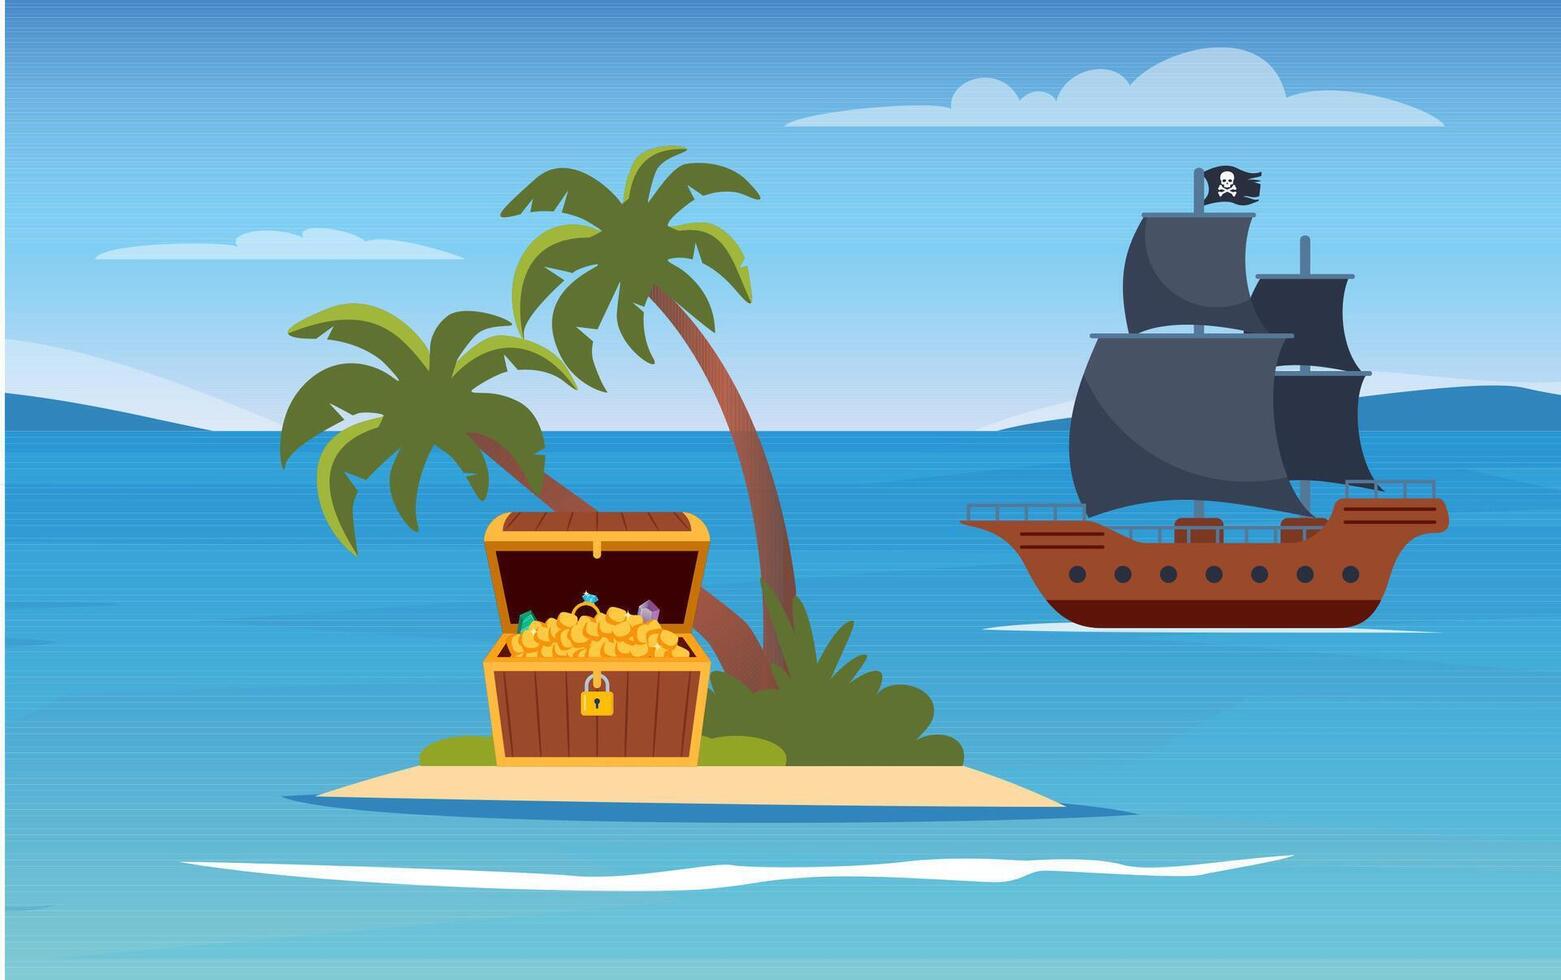 Tropical island with treasure chest and pirate ship near the island. Sea landscape with sail boat with skull on black sails, palm trees and gold coins on uninhabited island. Vector illustration.